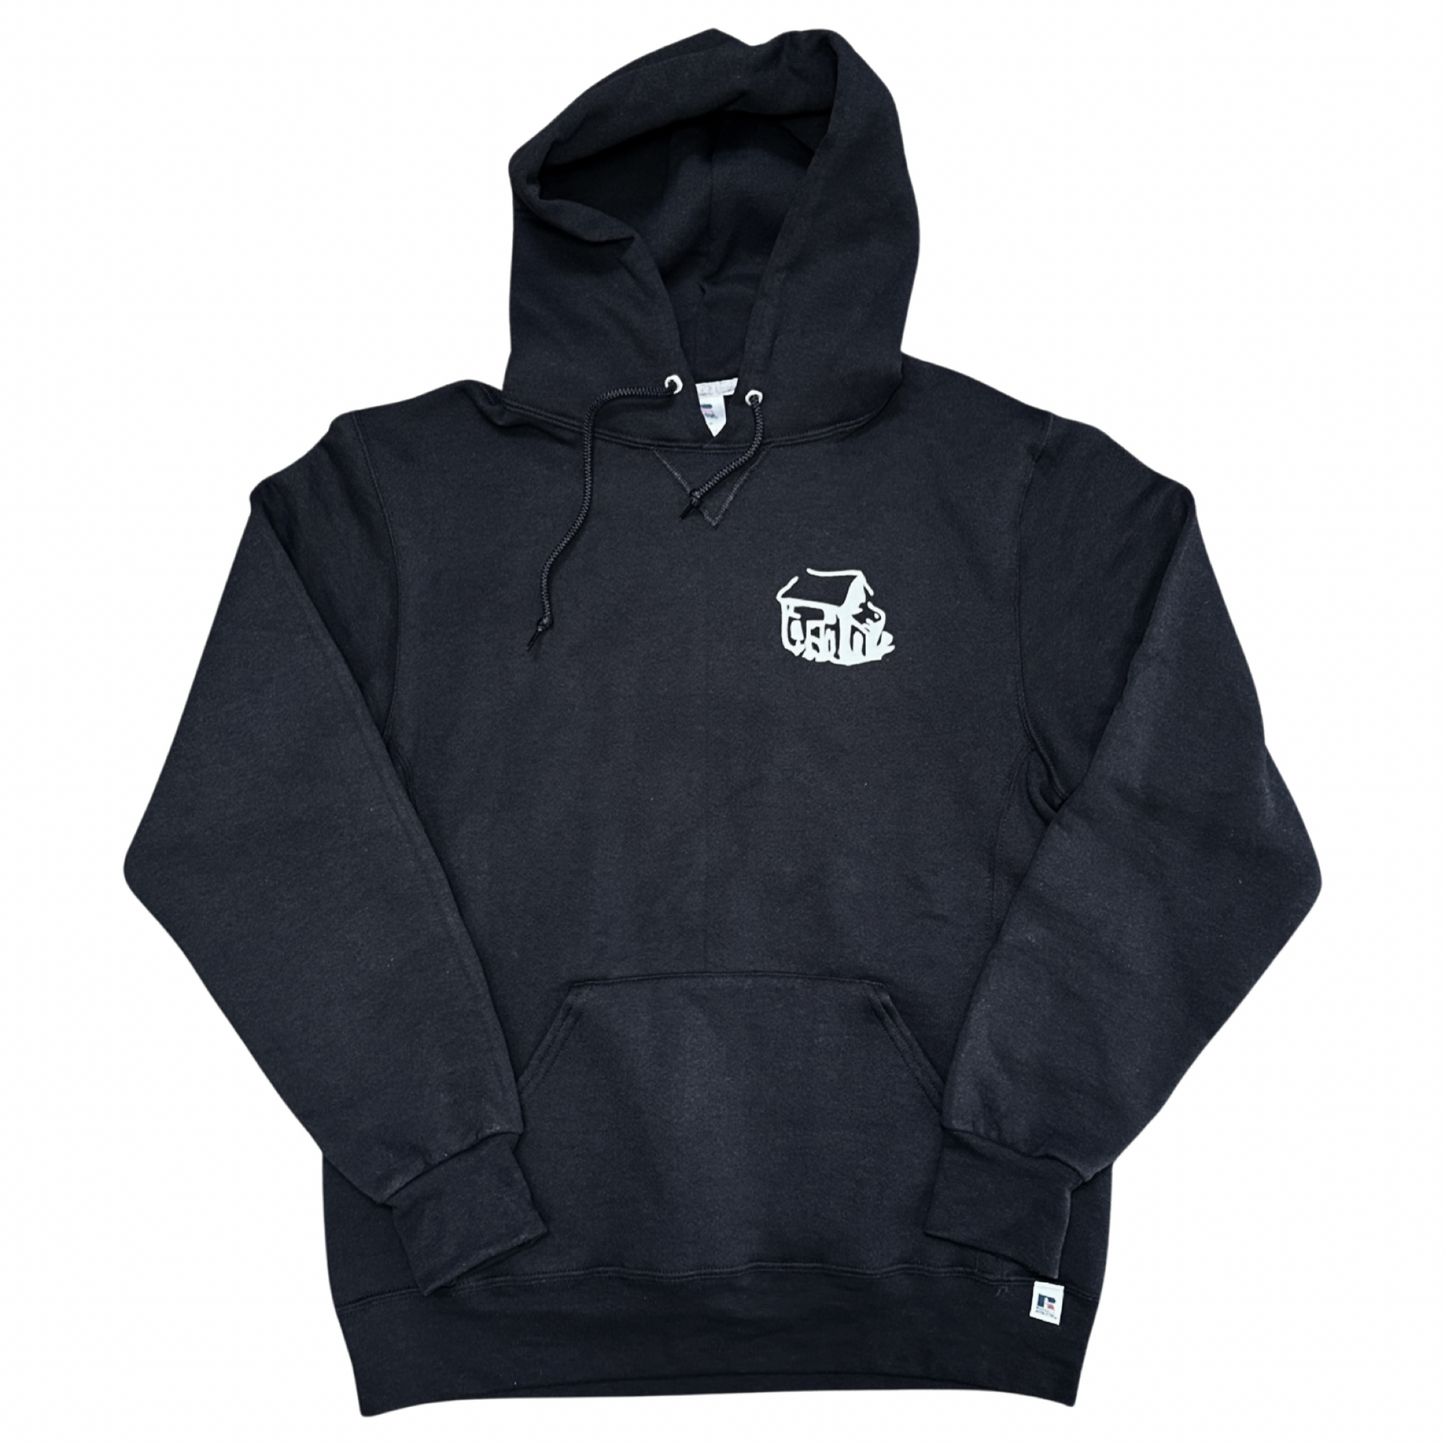 Marc Gonzales Stacked Deck Wall Skate Shop Day x The Shack Hoodie